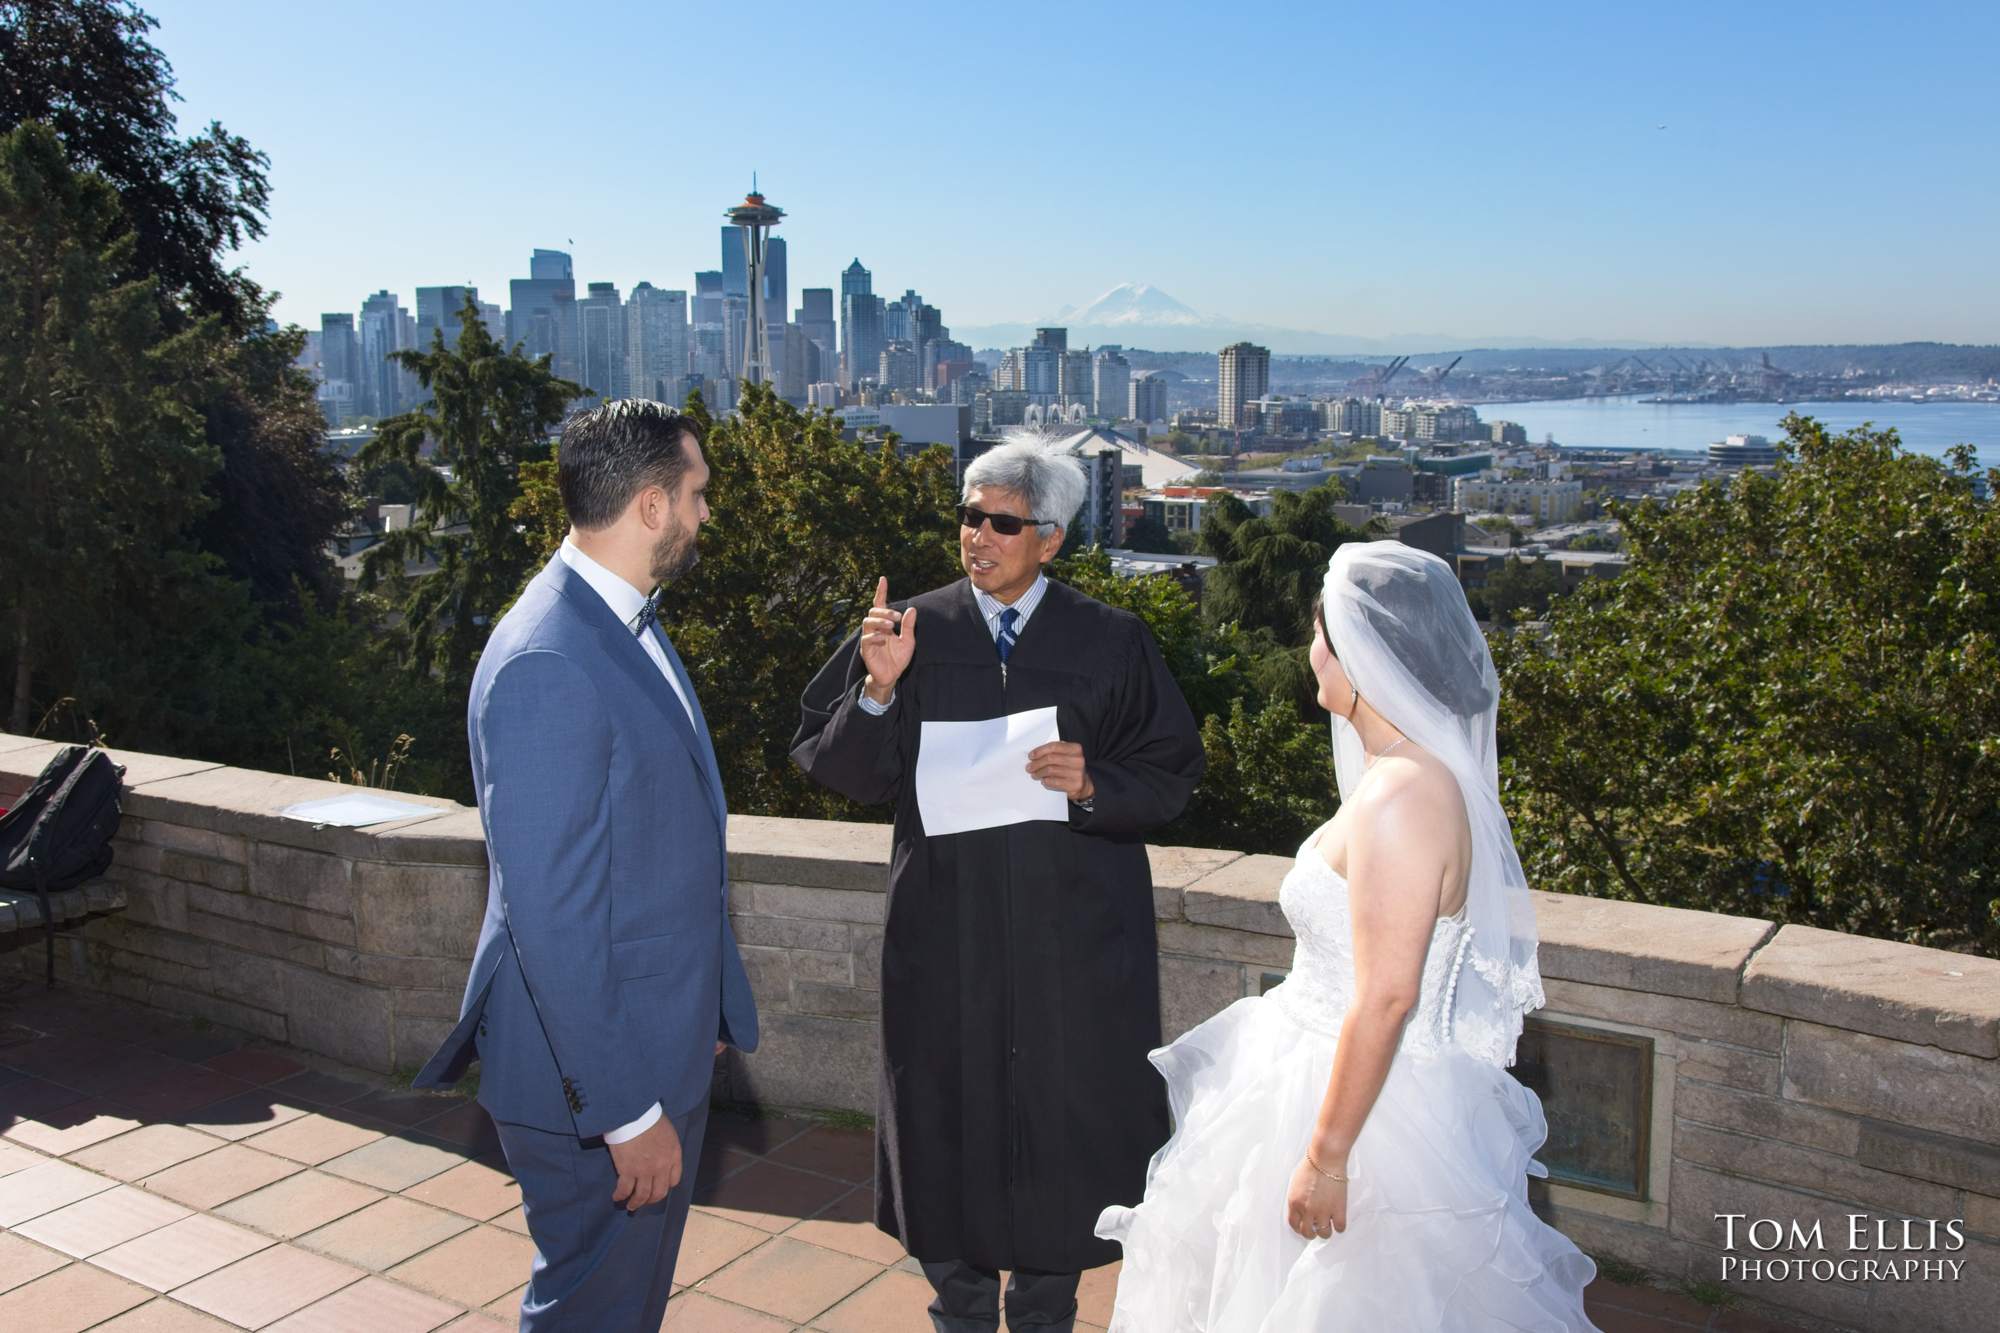 Angela and Josh at Kerry Park for their Seattle elopement wedding ceremony. Tom Ellis Photograhy, Seattle elopement photographert